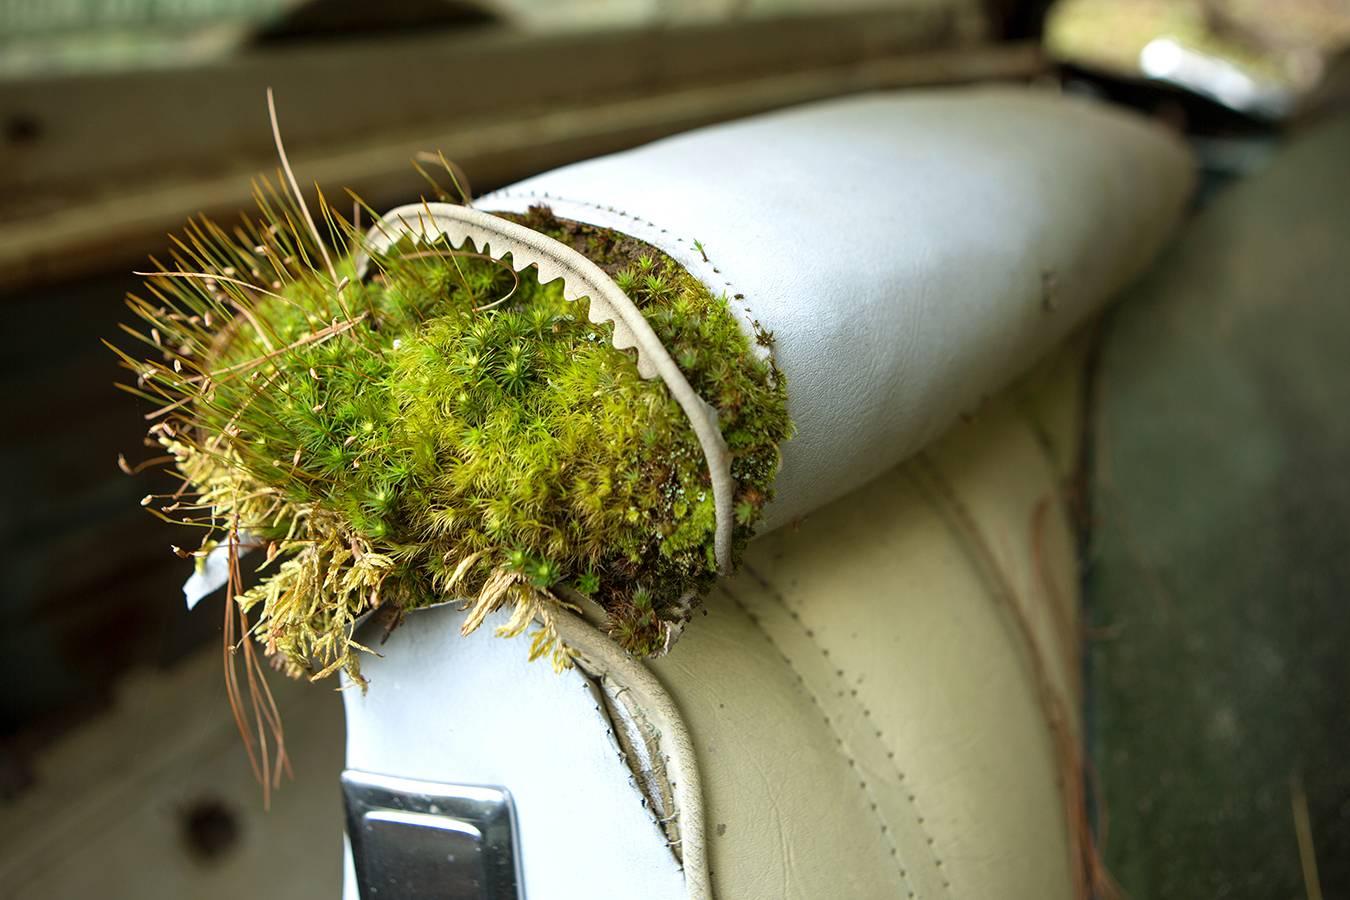 Rebecca Skinner Color Photograph - "Life Finds a Way", contemporary, abandoned car, moss, nature, color photograph